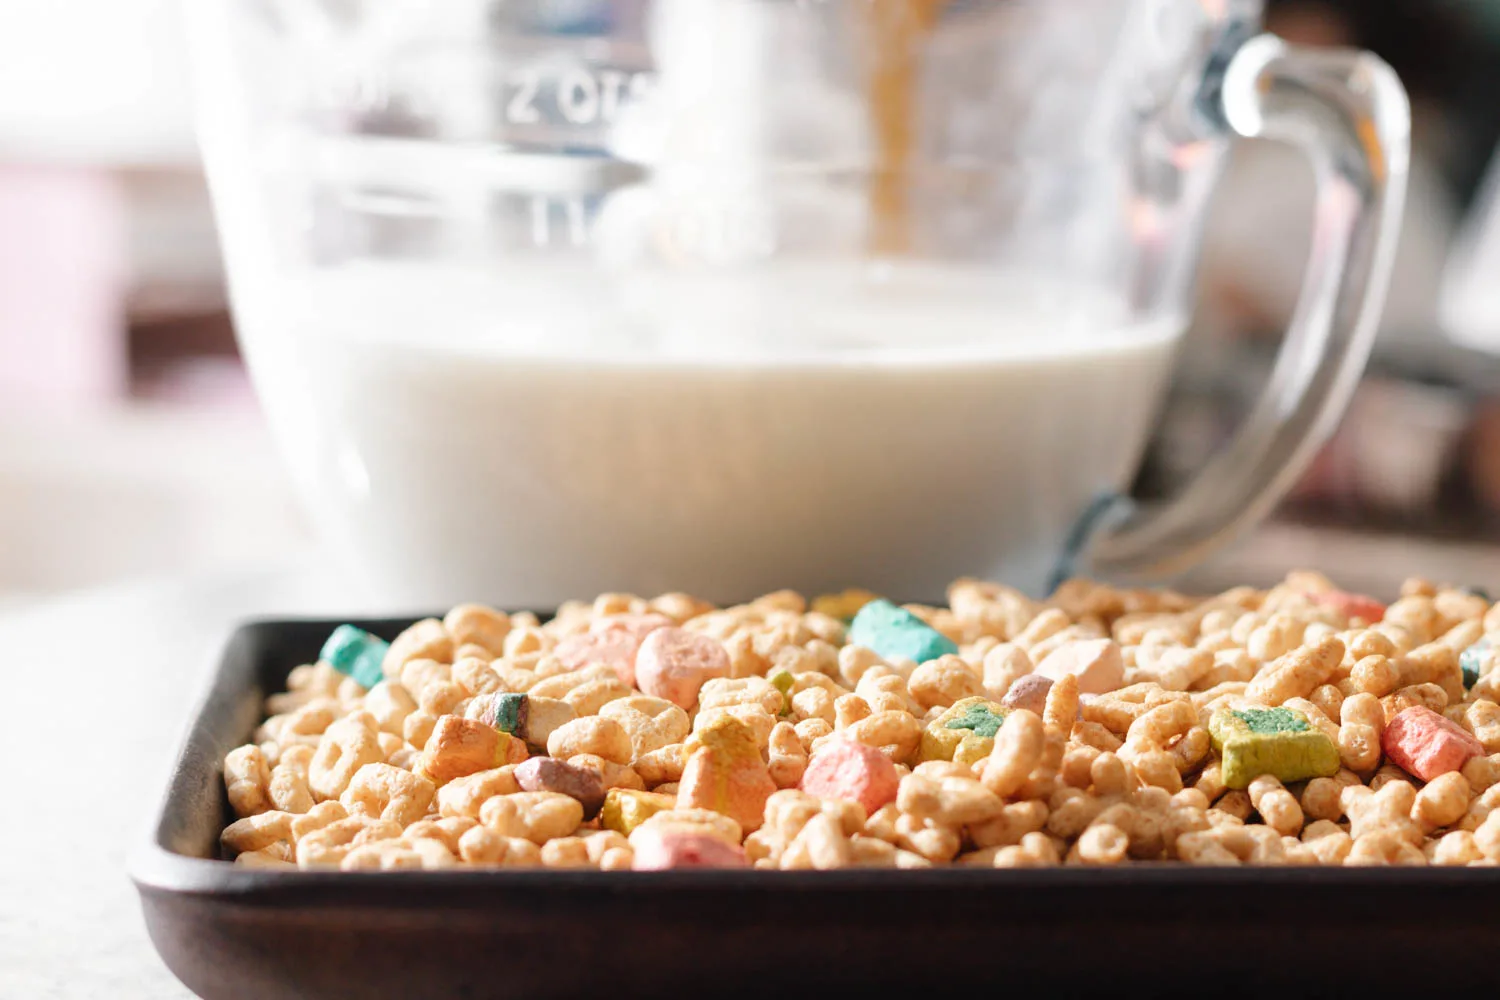 toasted lucky charms cereal ready to make cereal milk for the cake recipe